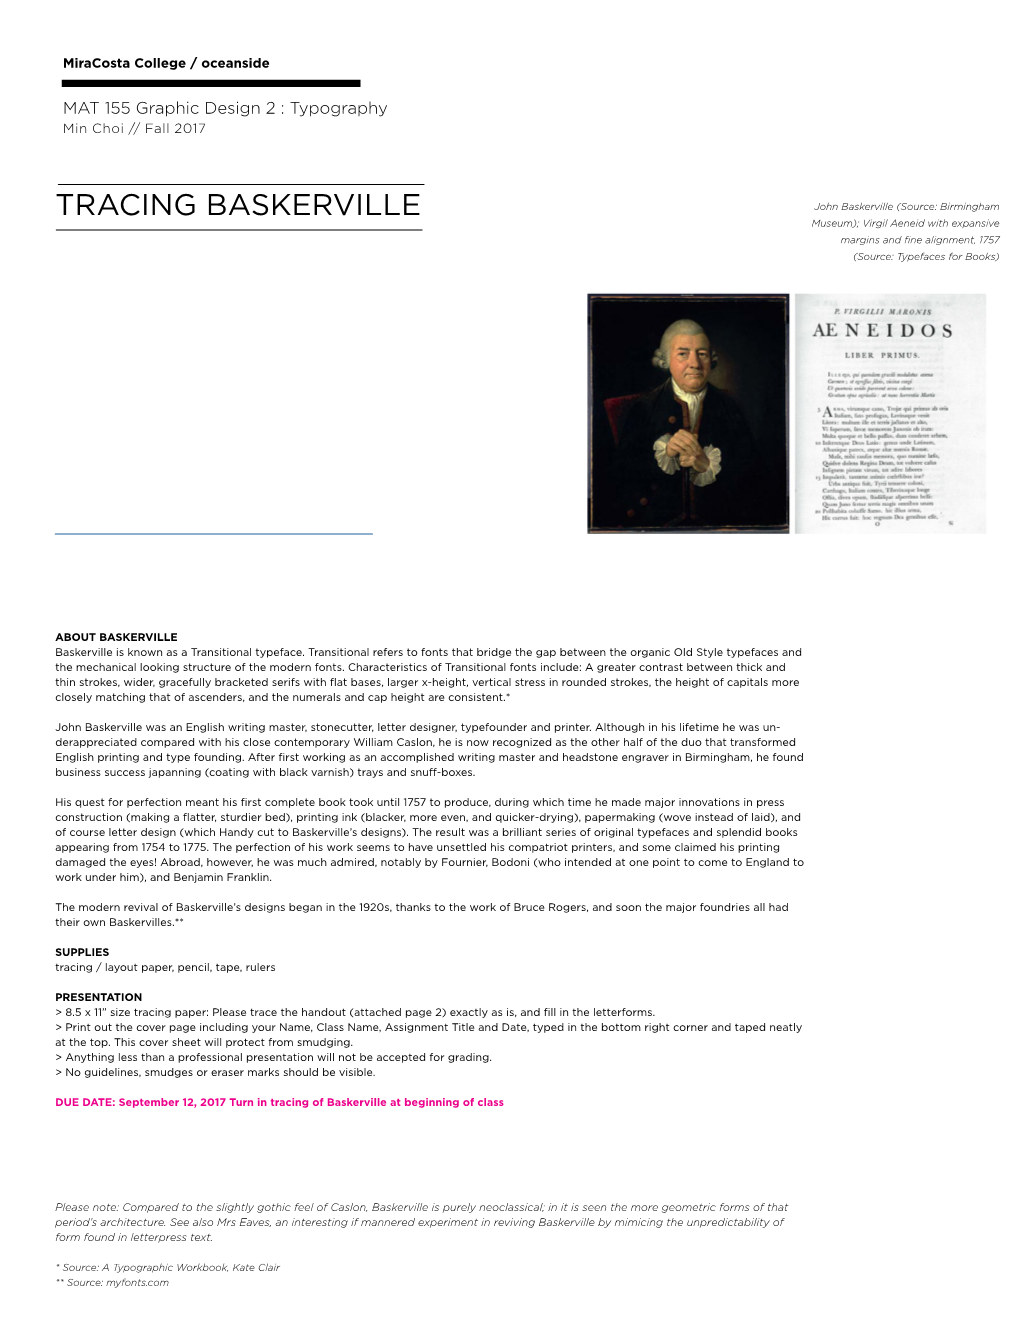 TRACING BASKERVILLE John Baskerville (Source: Birmingham Museum); Virgil Aeneid with Expansive Margins and Fine Alignment, 1757 (Source: Typefaces for Books)